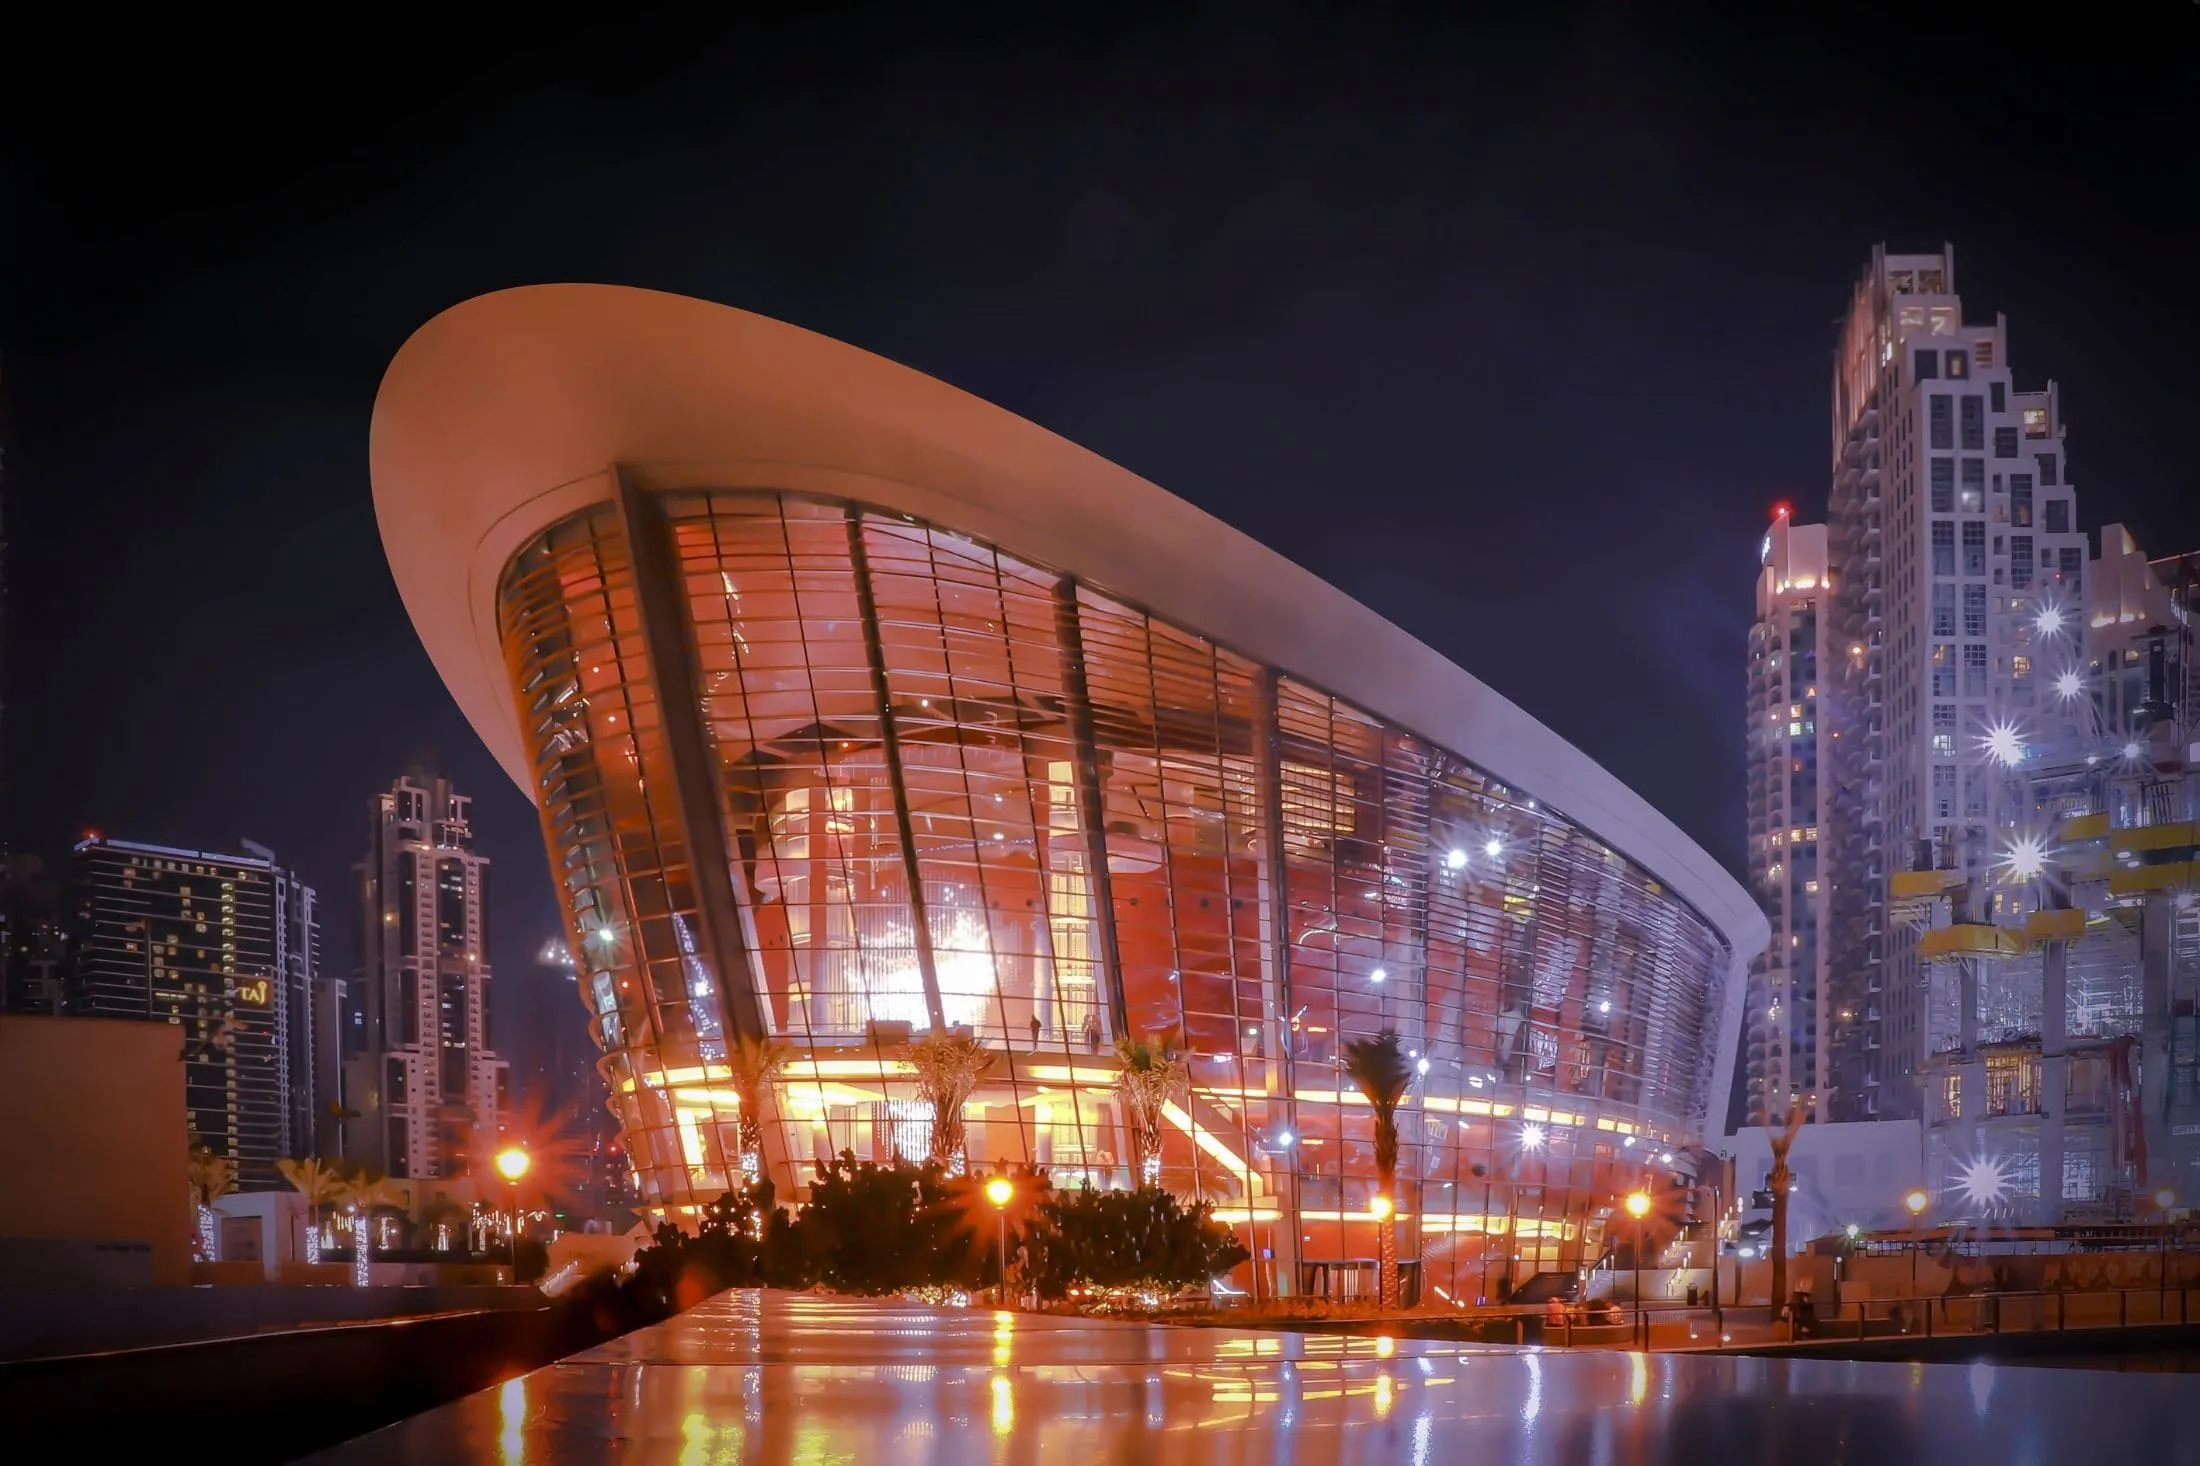 Dubai Opera, venue for concerts that are part of the Shopping Festival